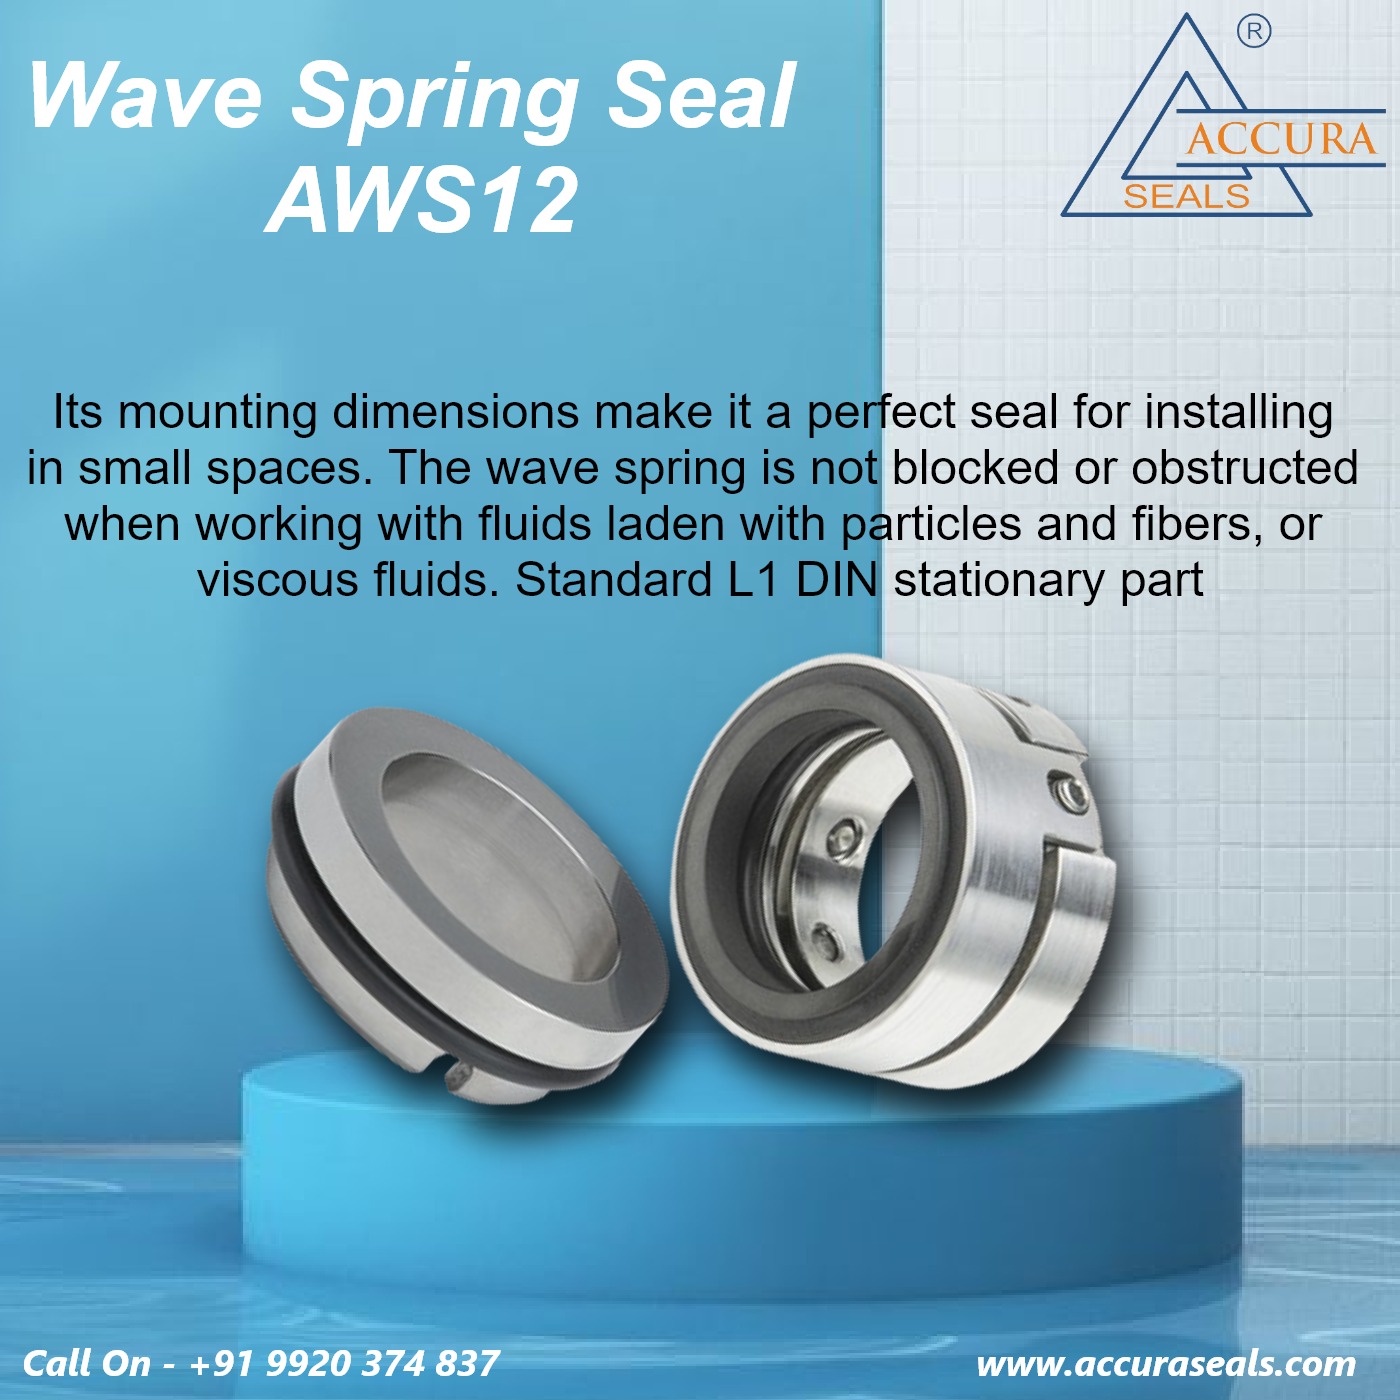 ACCURA SEALS - Wave Spring Seal AWS12 for Small Spaces